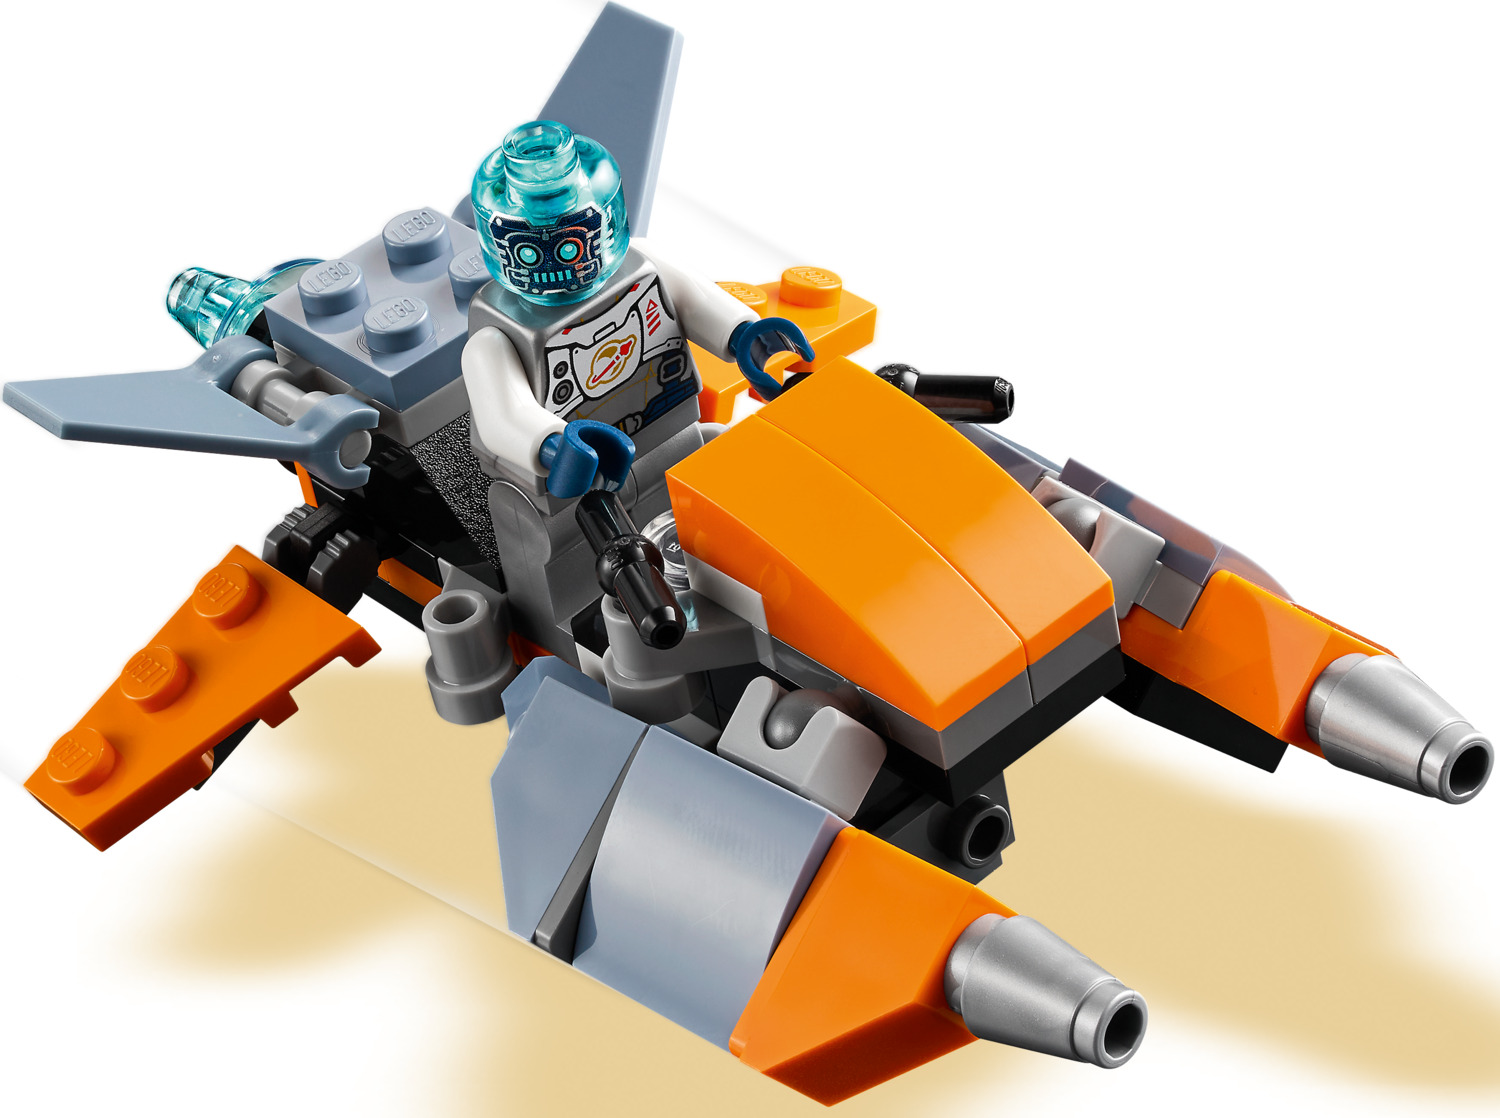  LEGO Creator 3 in 1 Cyber Drone Space Toys, Transforms from  Drone to Cyber Mech or Cyber Scooter, Space Toy Building Set, Gift for 6  Plus Year Old Kids, Boys, and